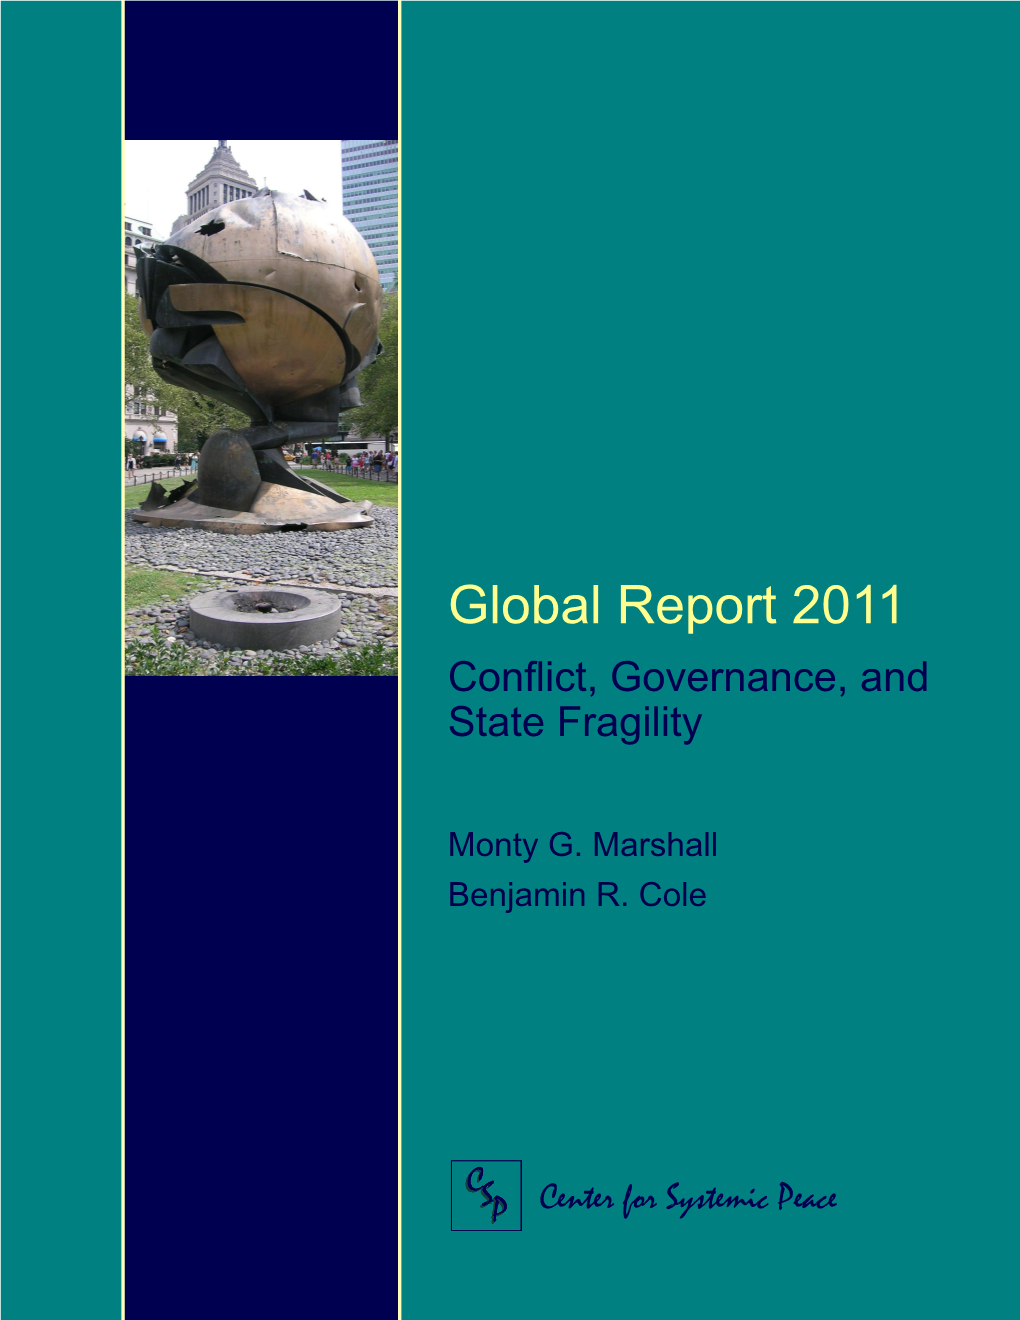 Global Report 2011 Conflict, Governance, and State Fragility